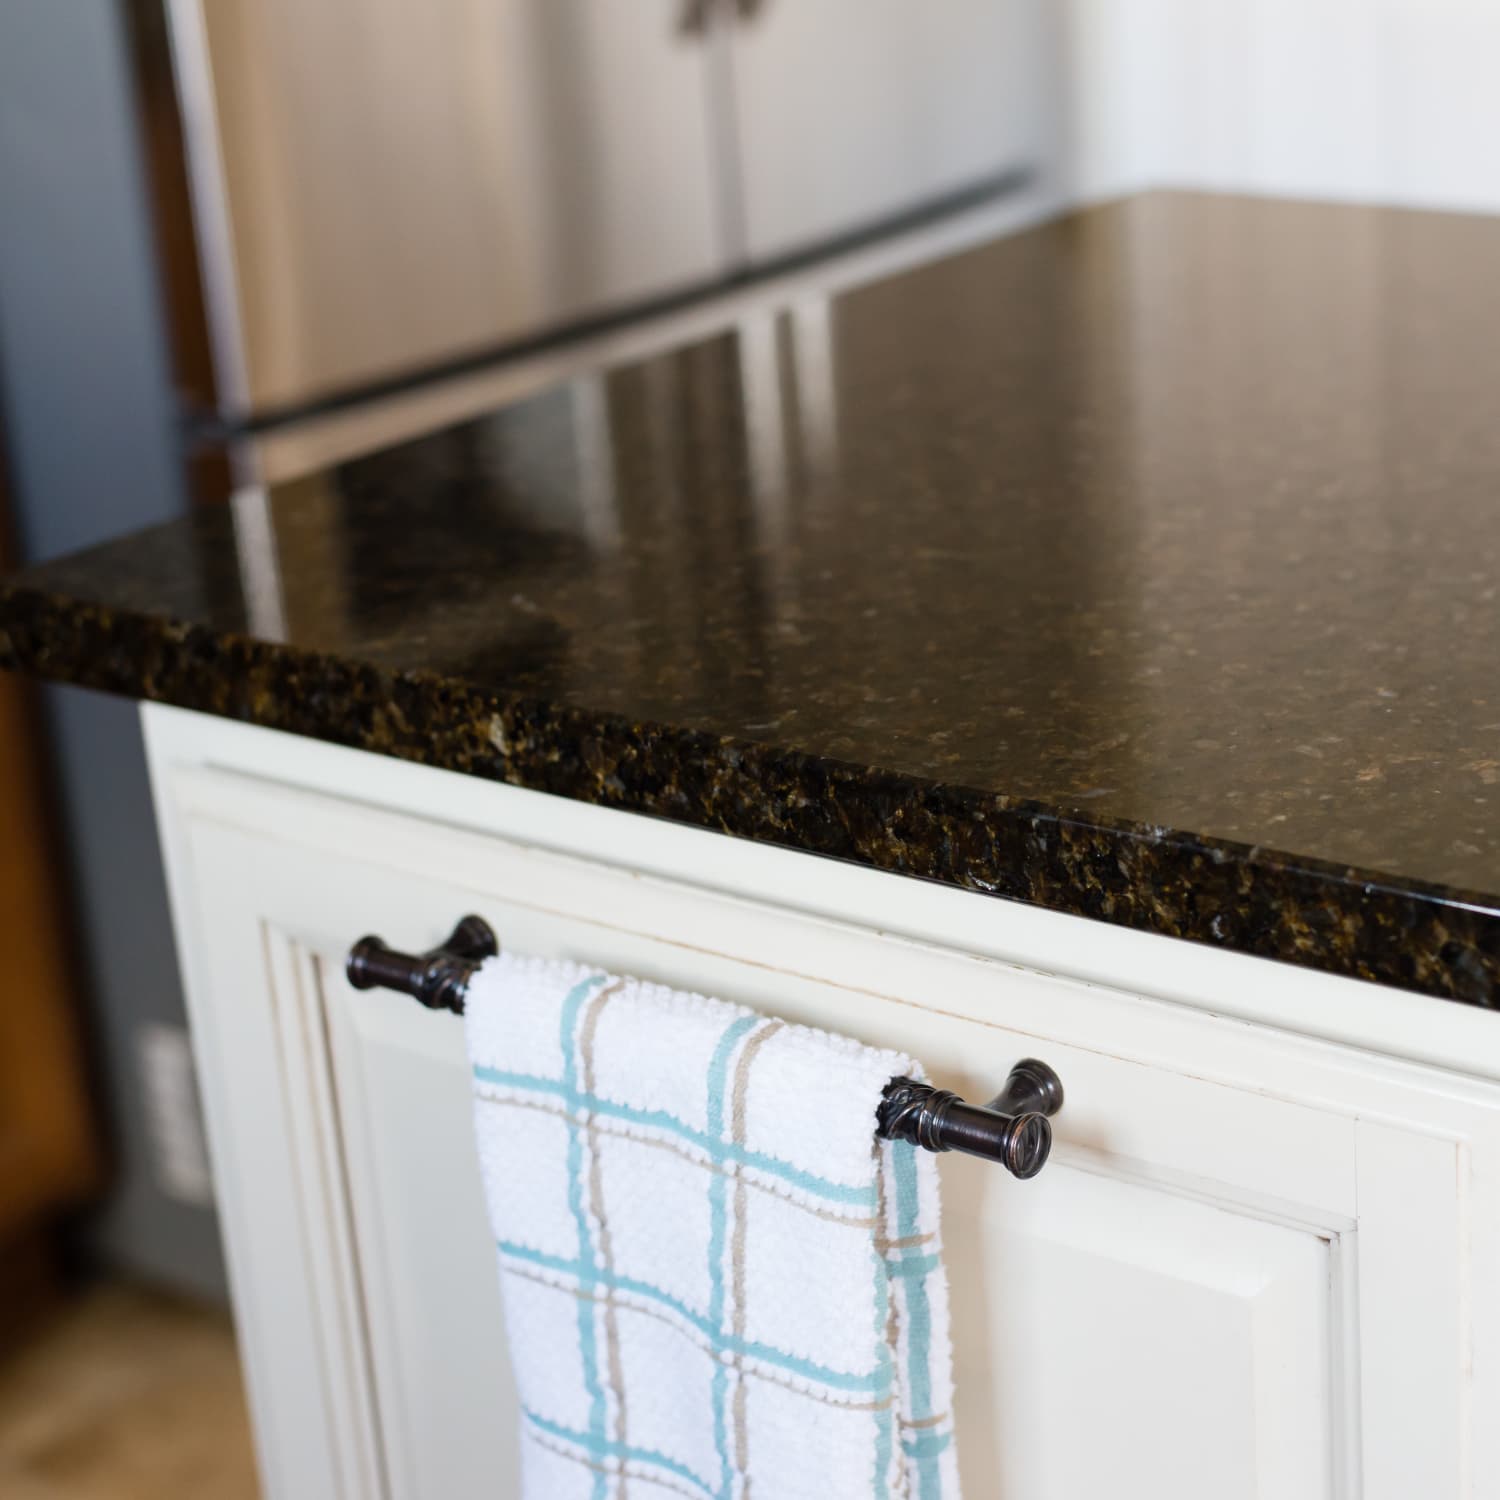 How To Clean And Disinfect Granite Countertops Kitchn